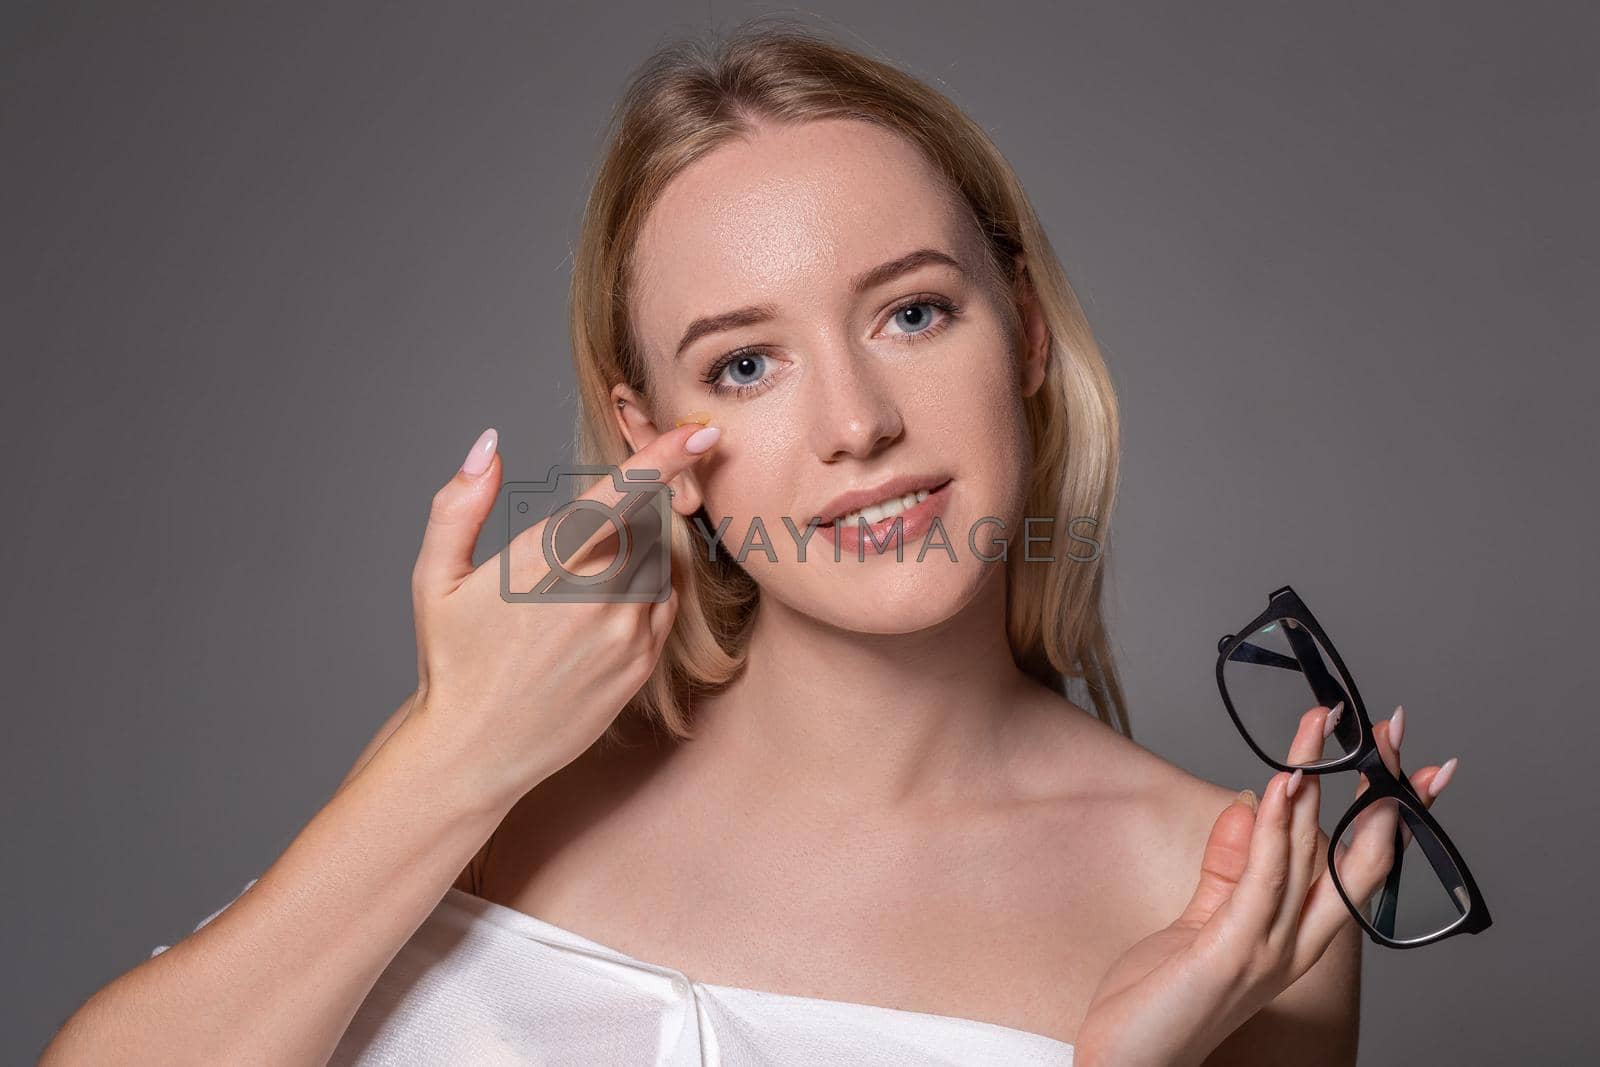 Royalty free image of Young blonde woman holding contact lens on finger in front of her face and holding in her other hand a black glasses on gray background. by nazarovsergey